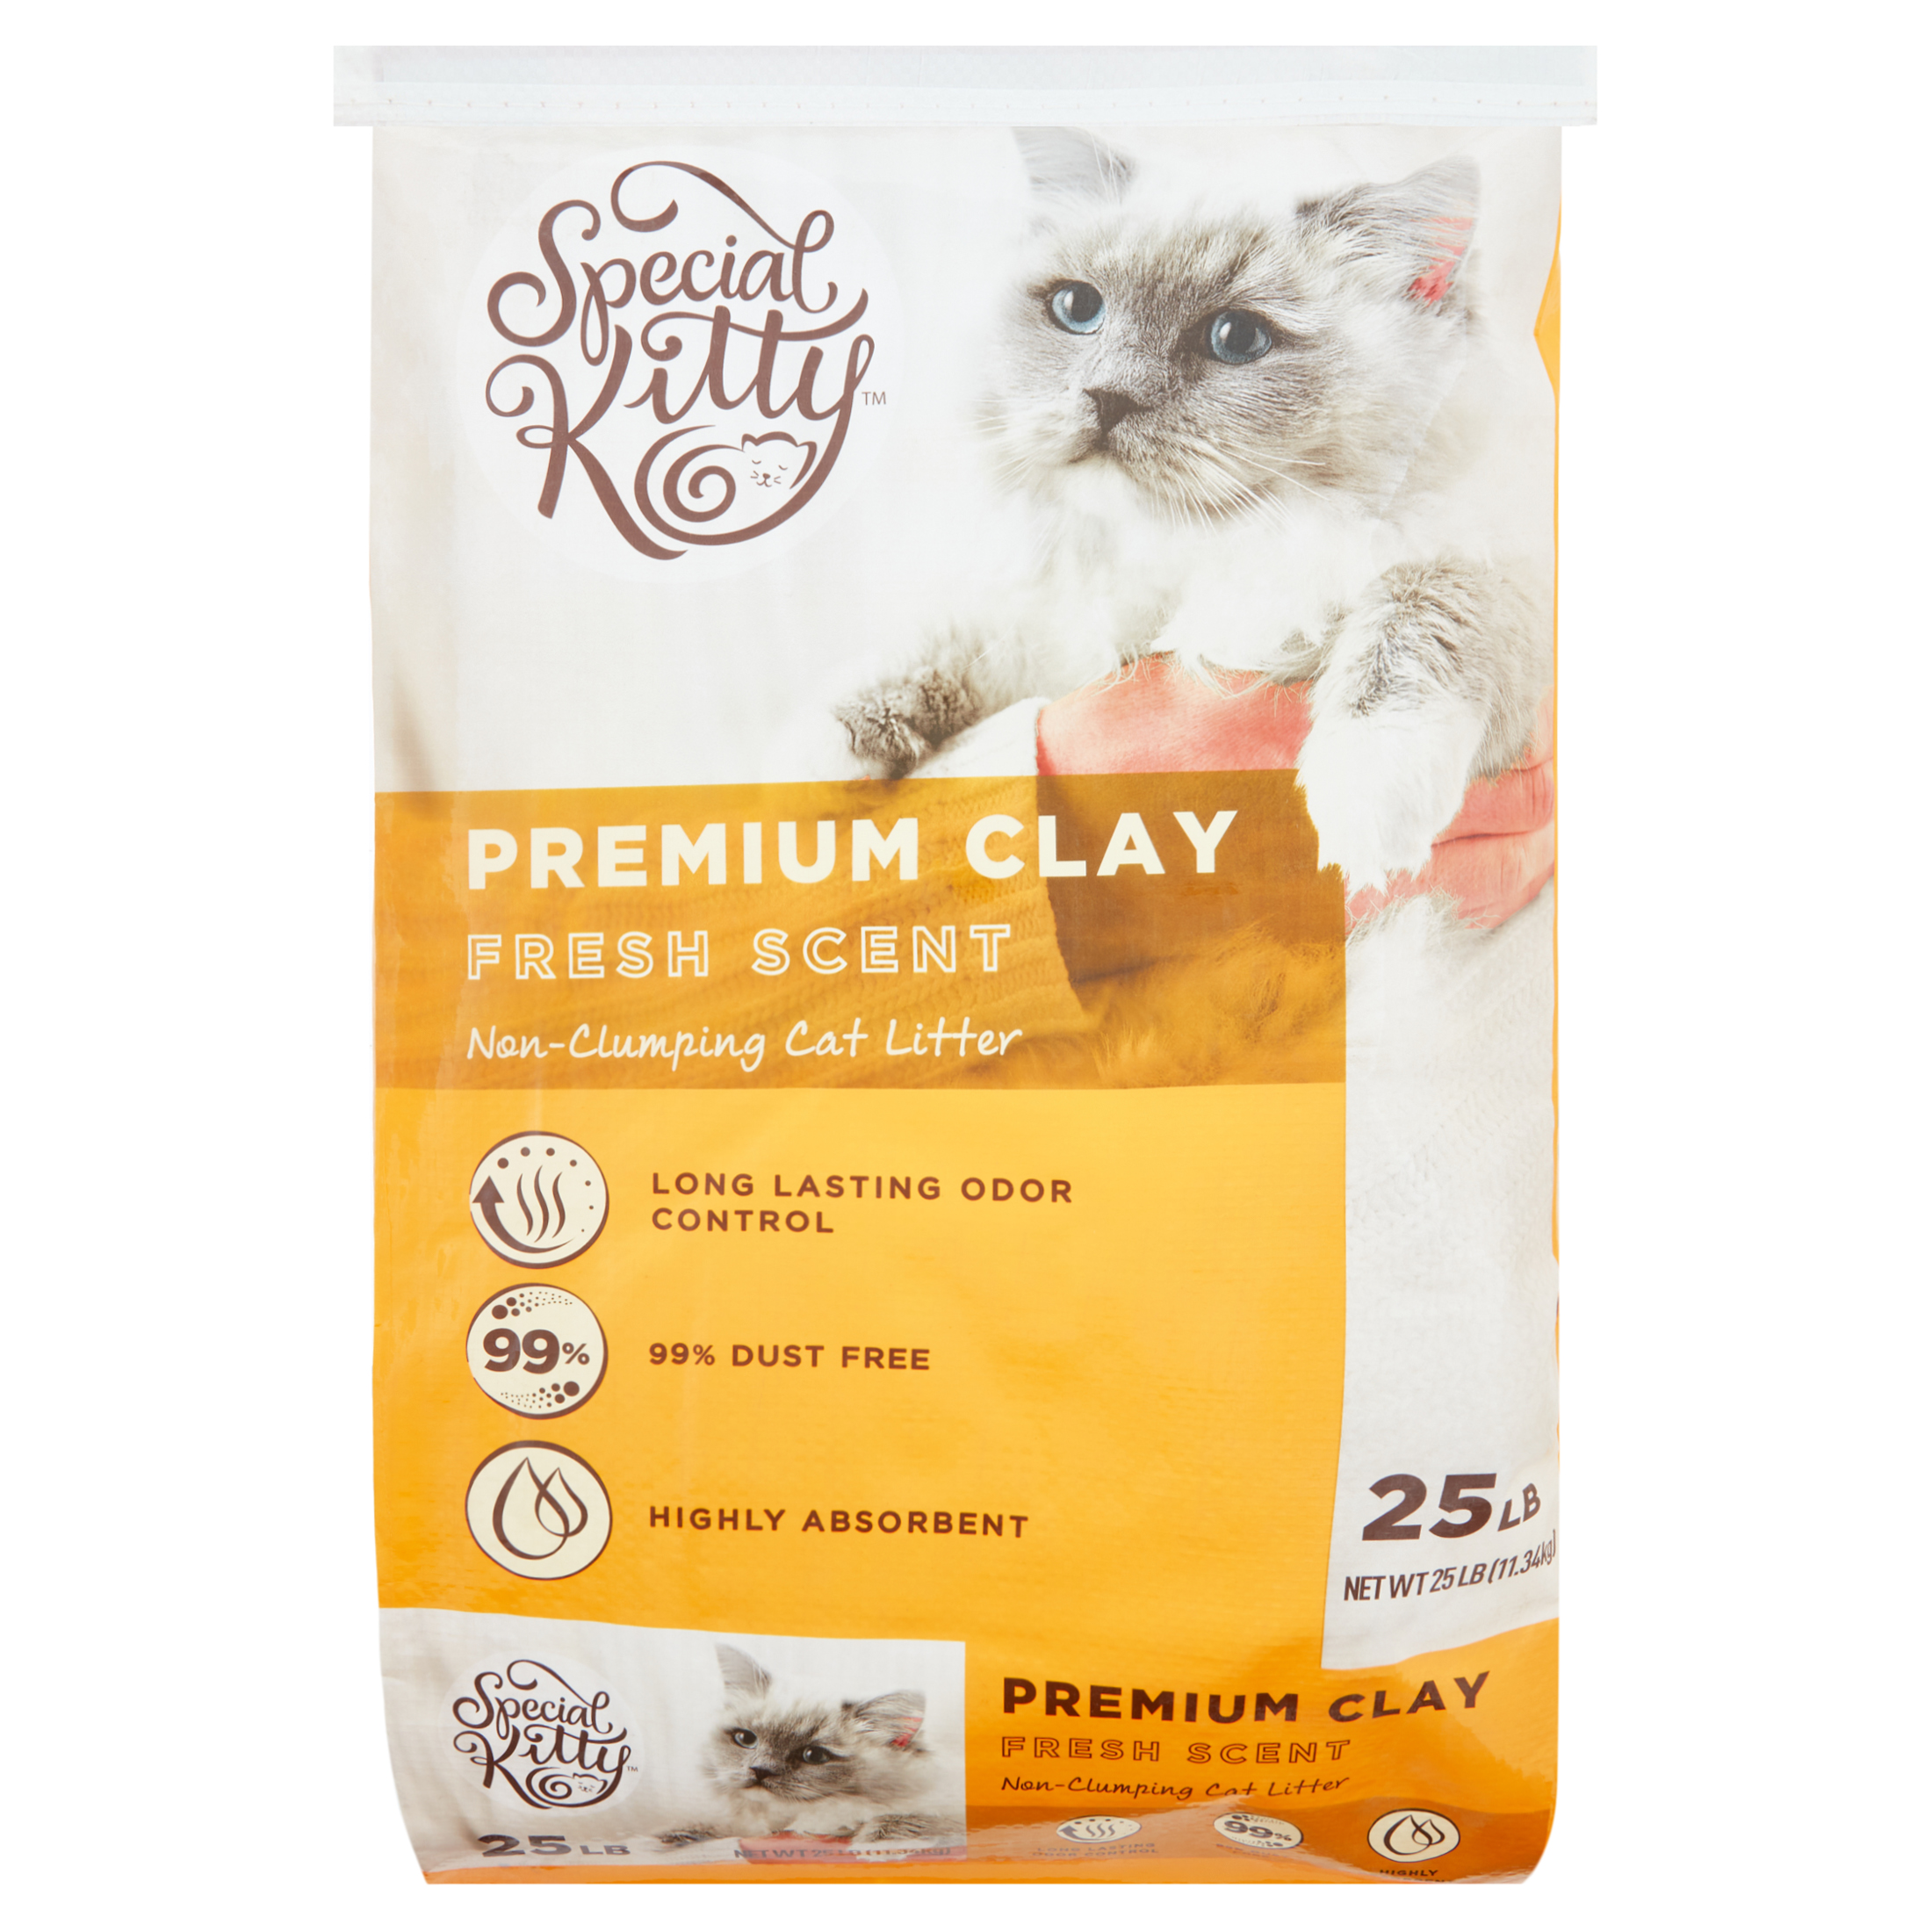 Special Kitty Premium Clay Non-Clumping Cat Litter, Fresh Scent, 25 lb - image 1 of 7